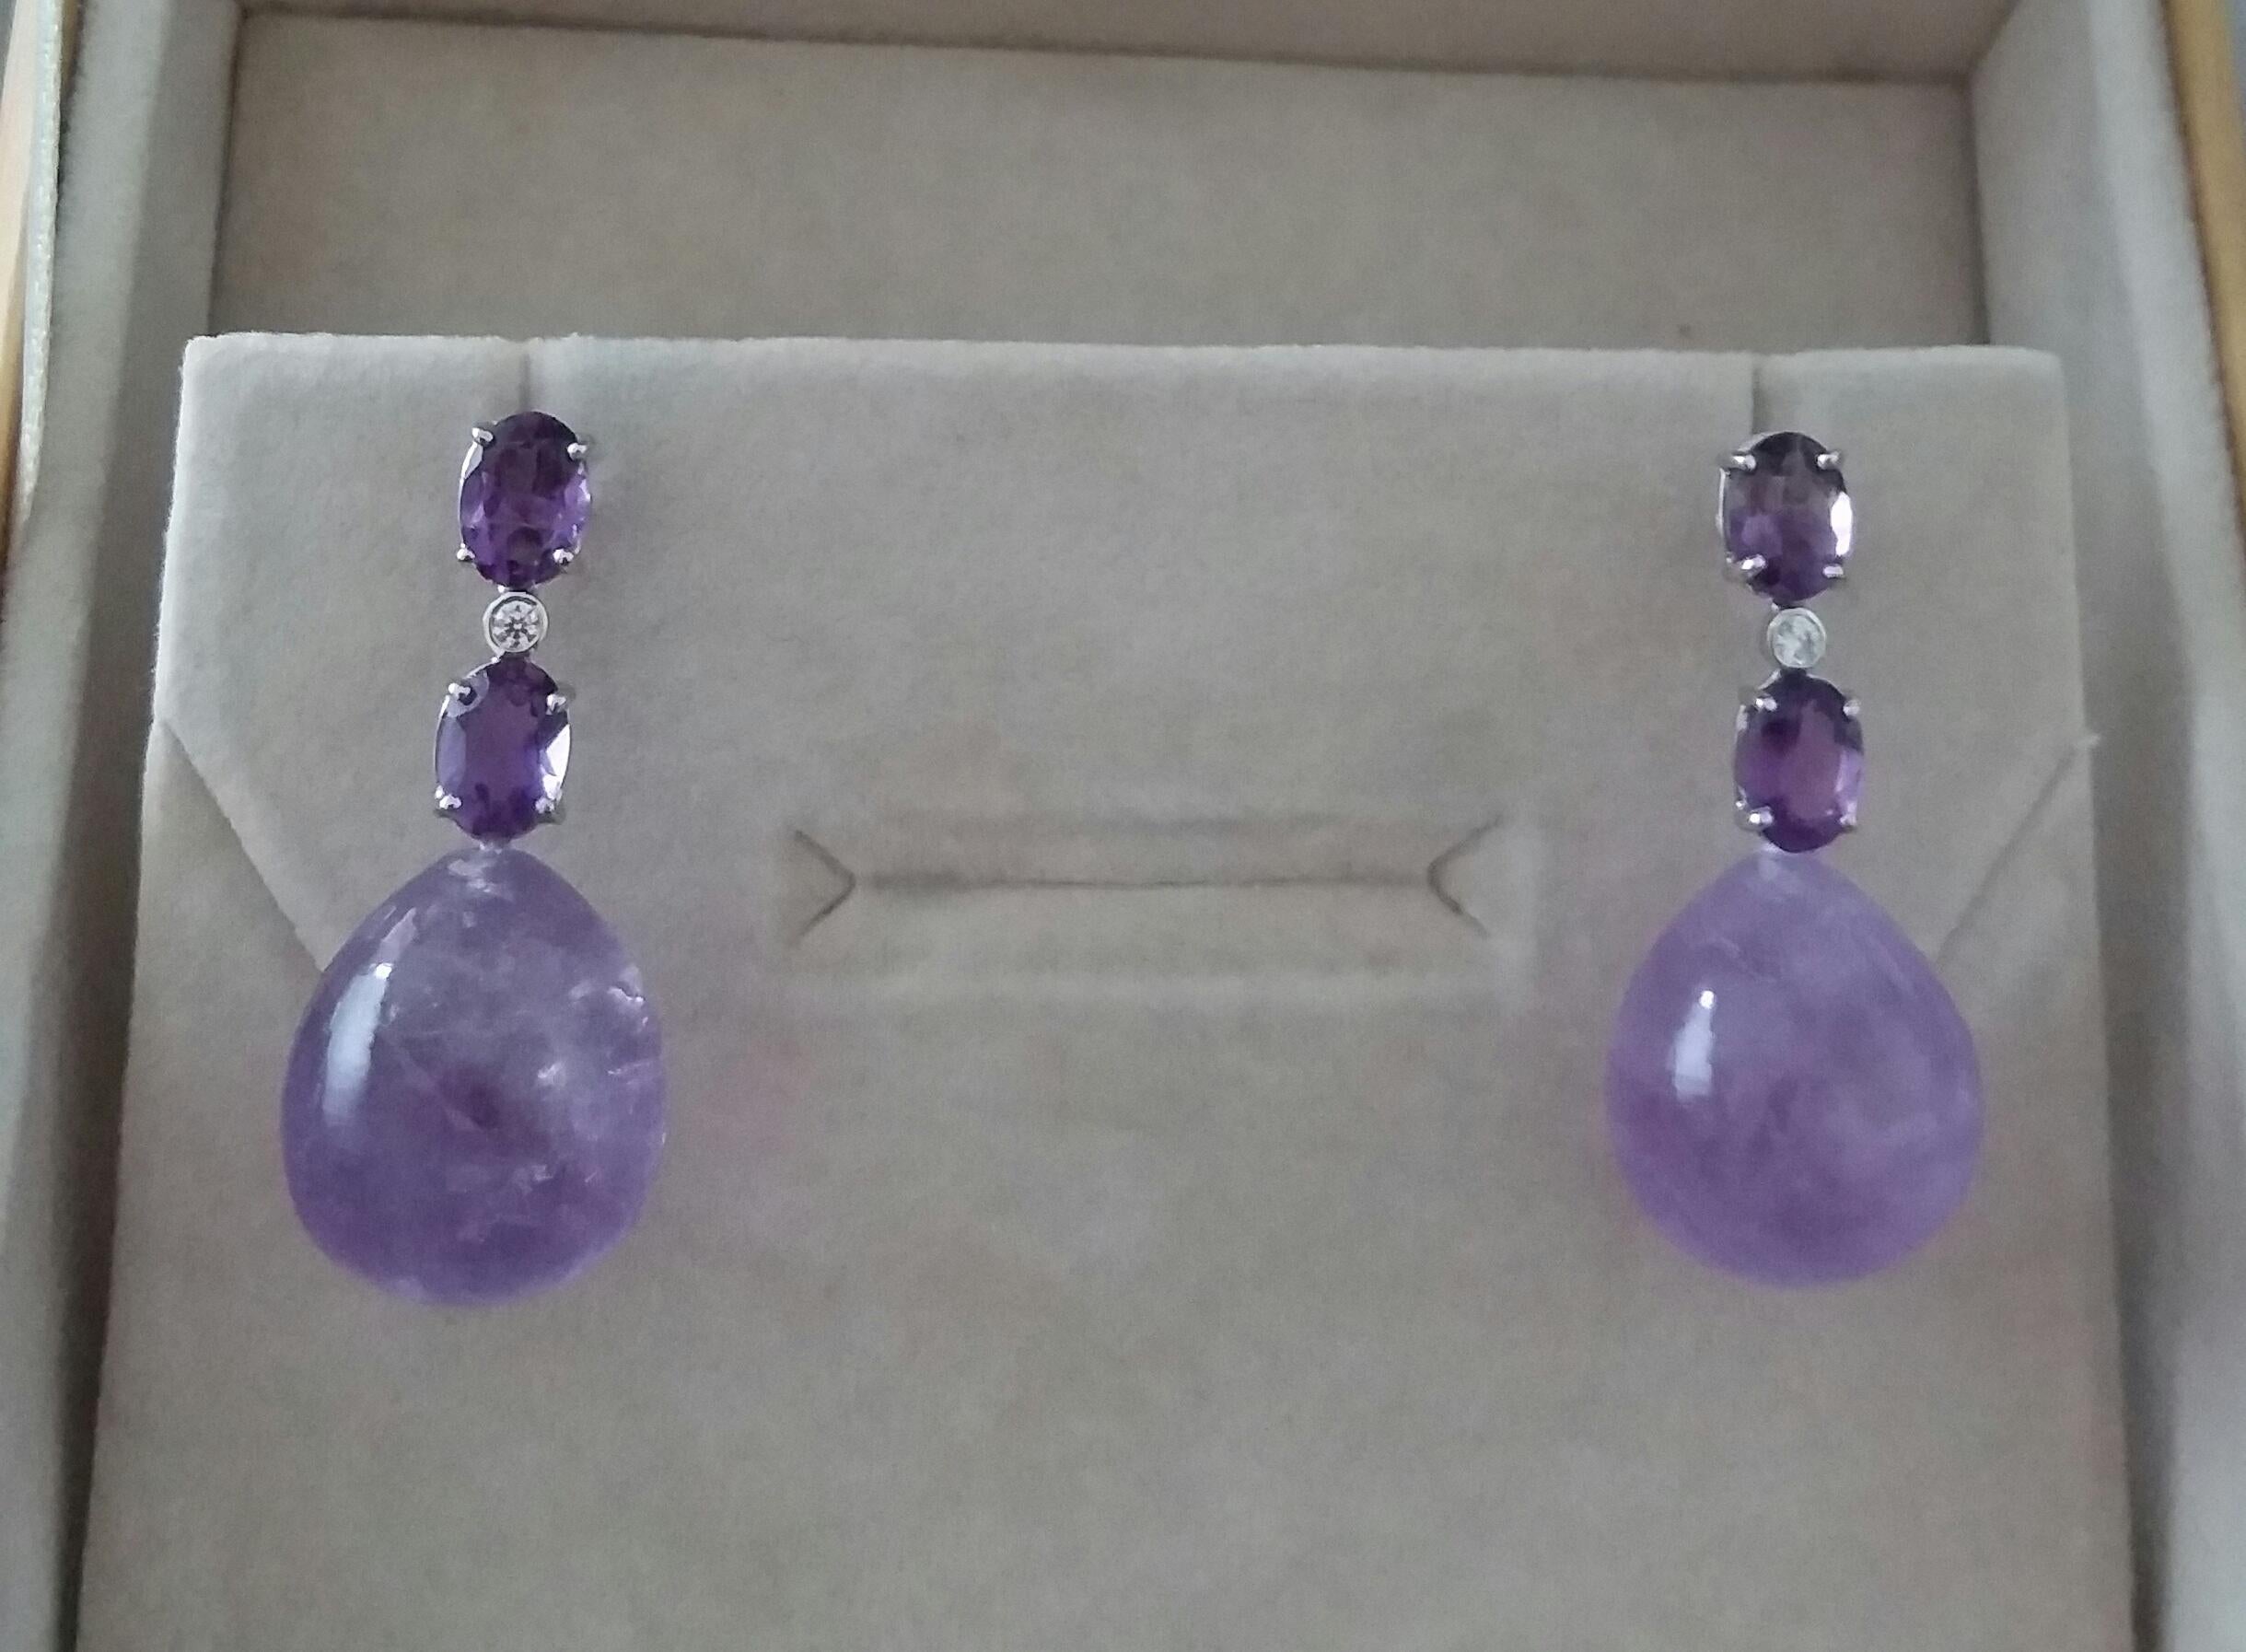 2 Oval Shape Faceted Amethyst Gold Diamonds 2 Plain Round Amethyst Drop Earrings For Sale 3